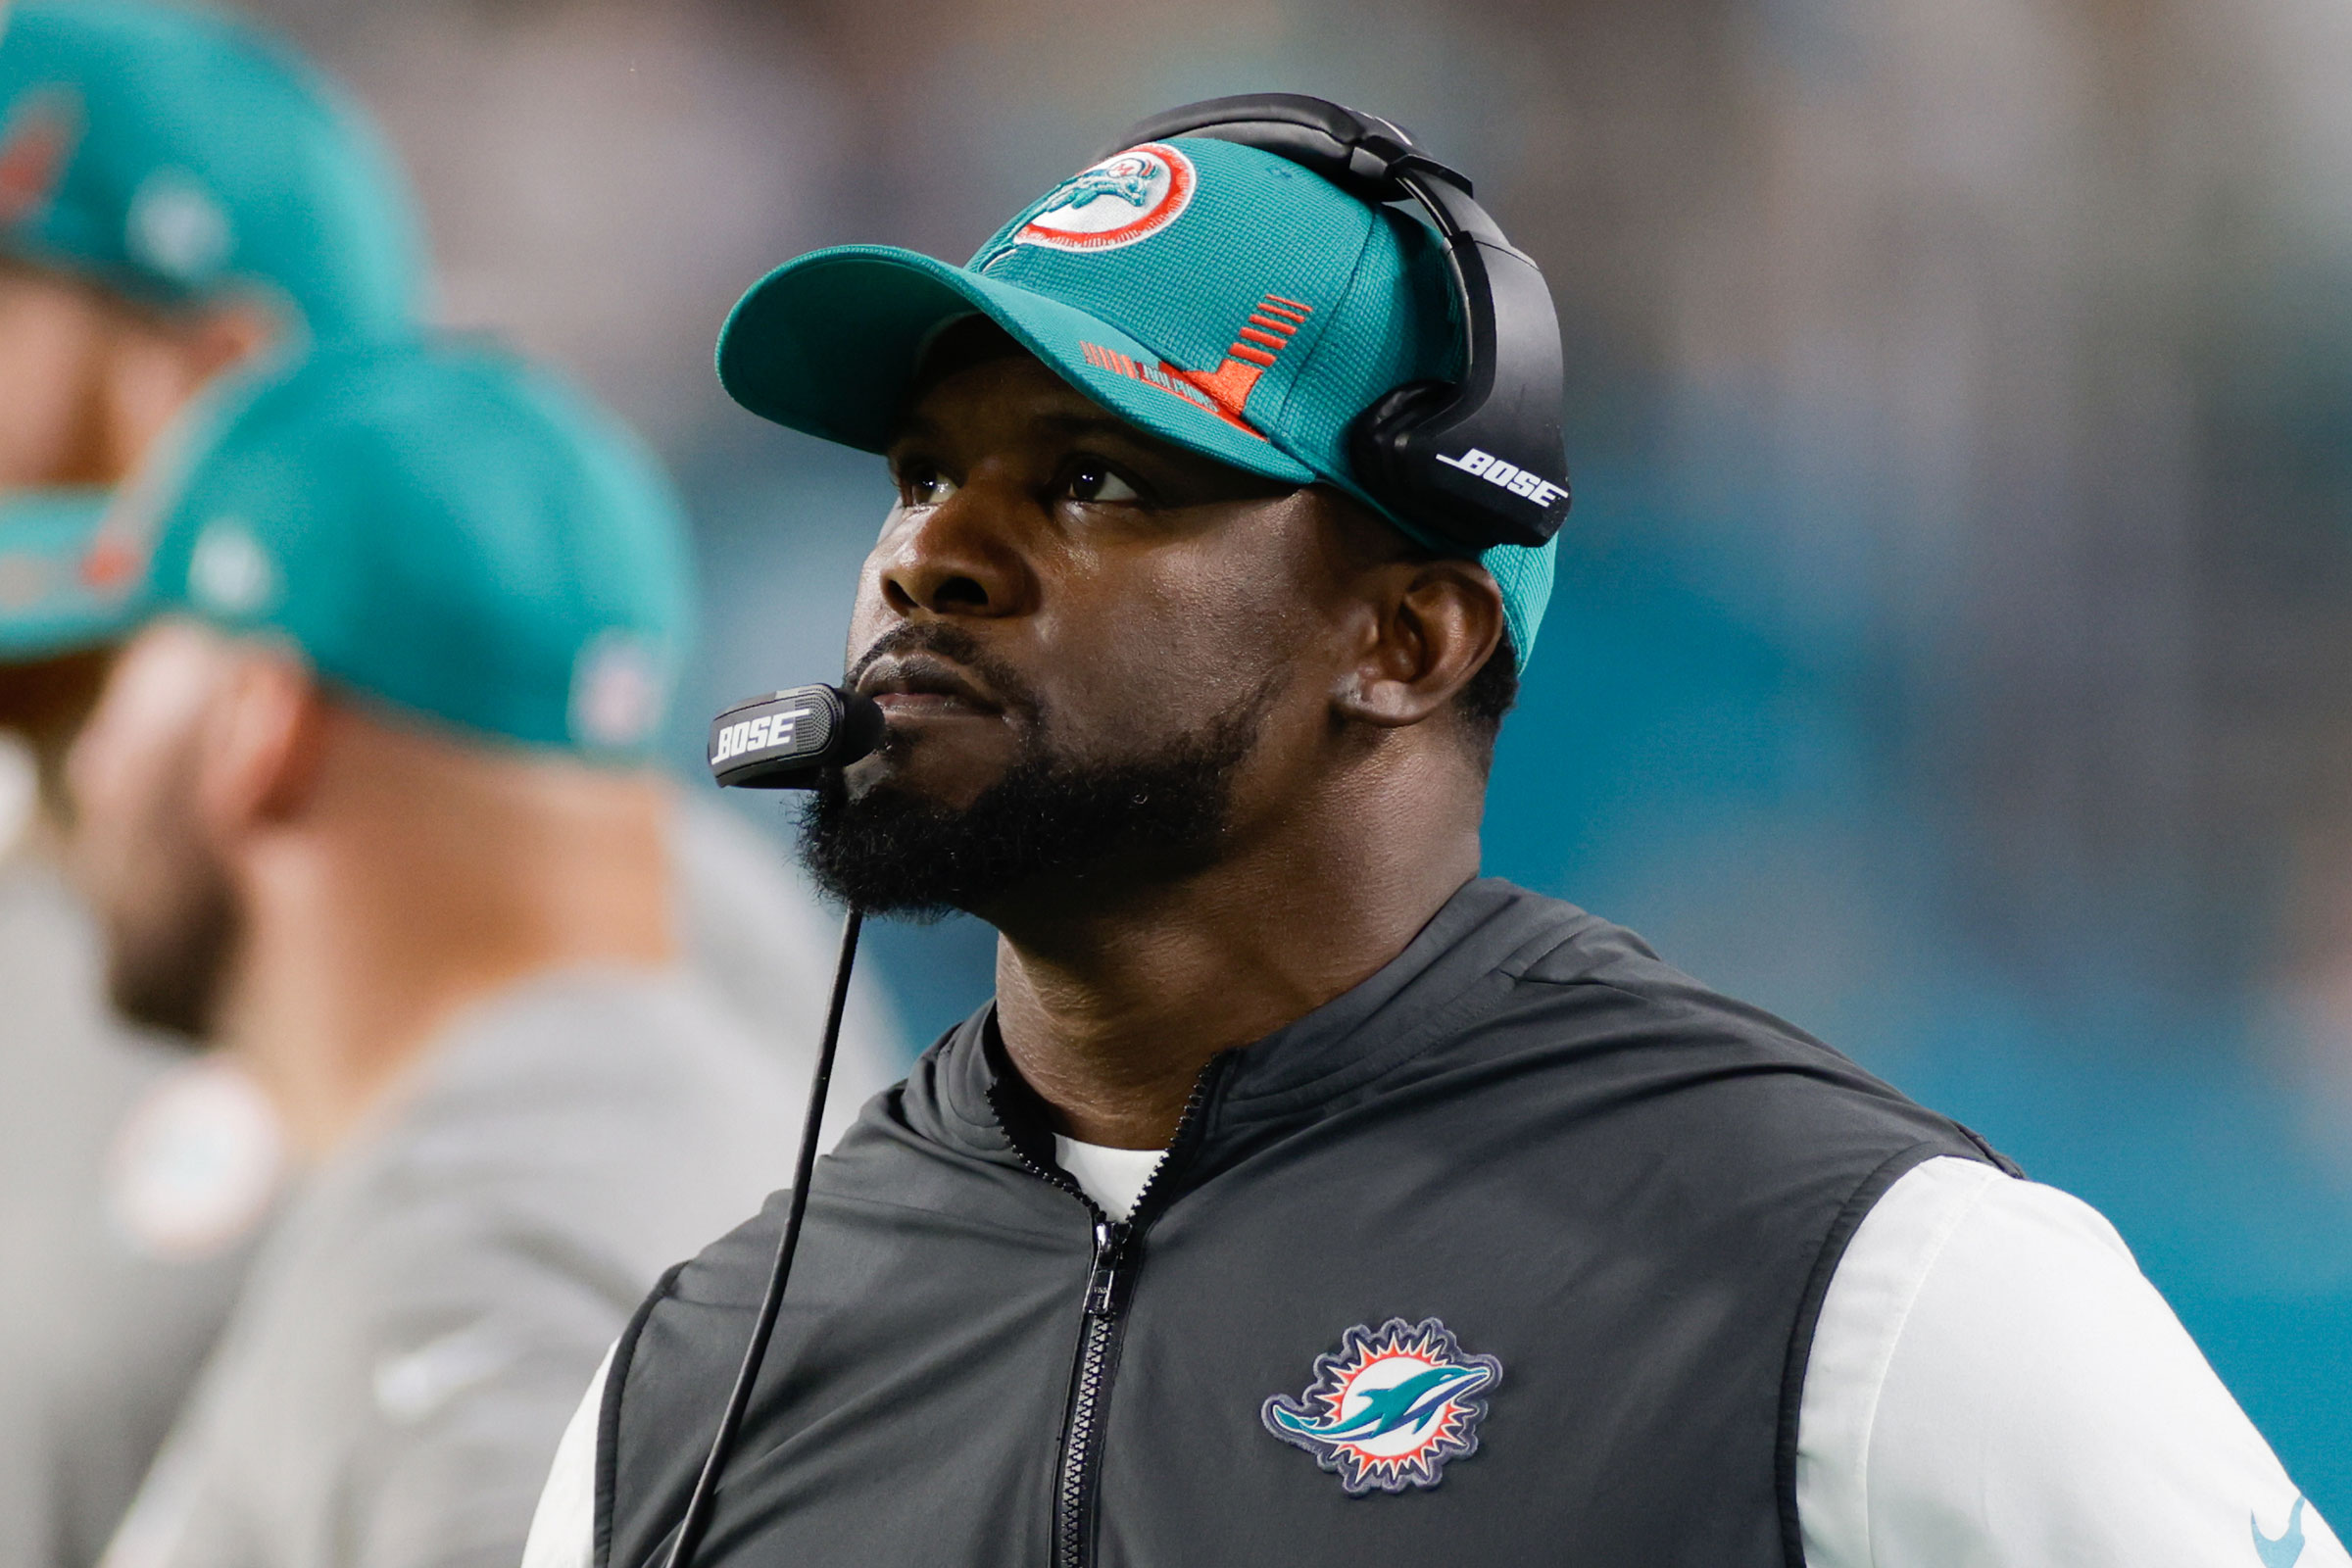 Miami Dolphins head coach Brian Flores during the game between the New England Patriots and the Miami Dolphins in Miami Gardens, Fl. on on Jan. 9, 2022. (David Rosenblum—Icon Sportswire/Getty Images)